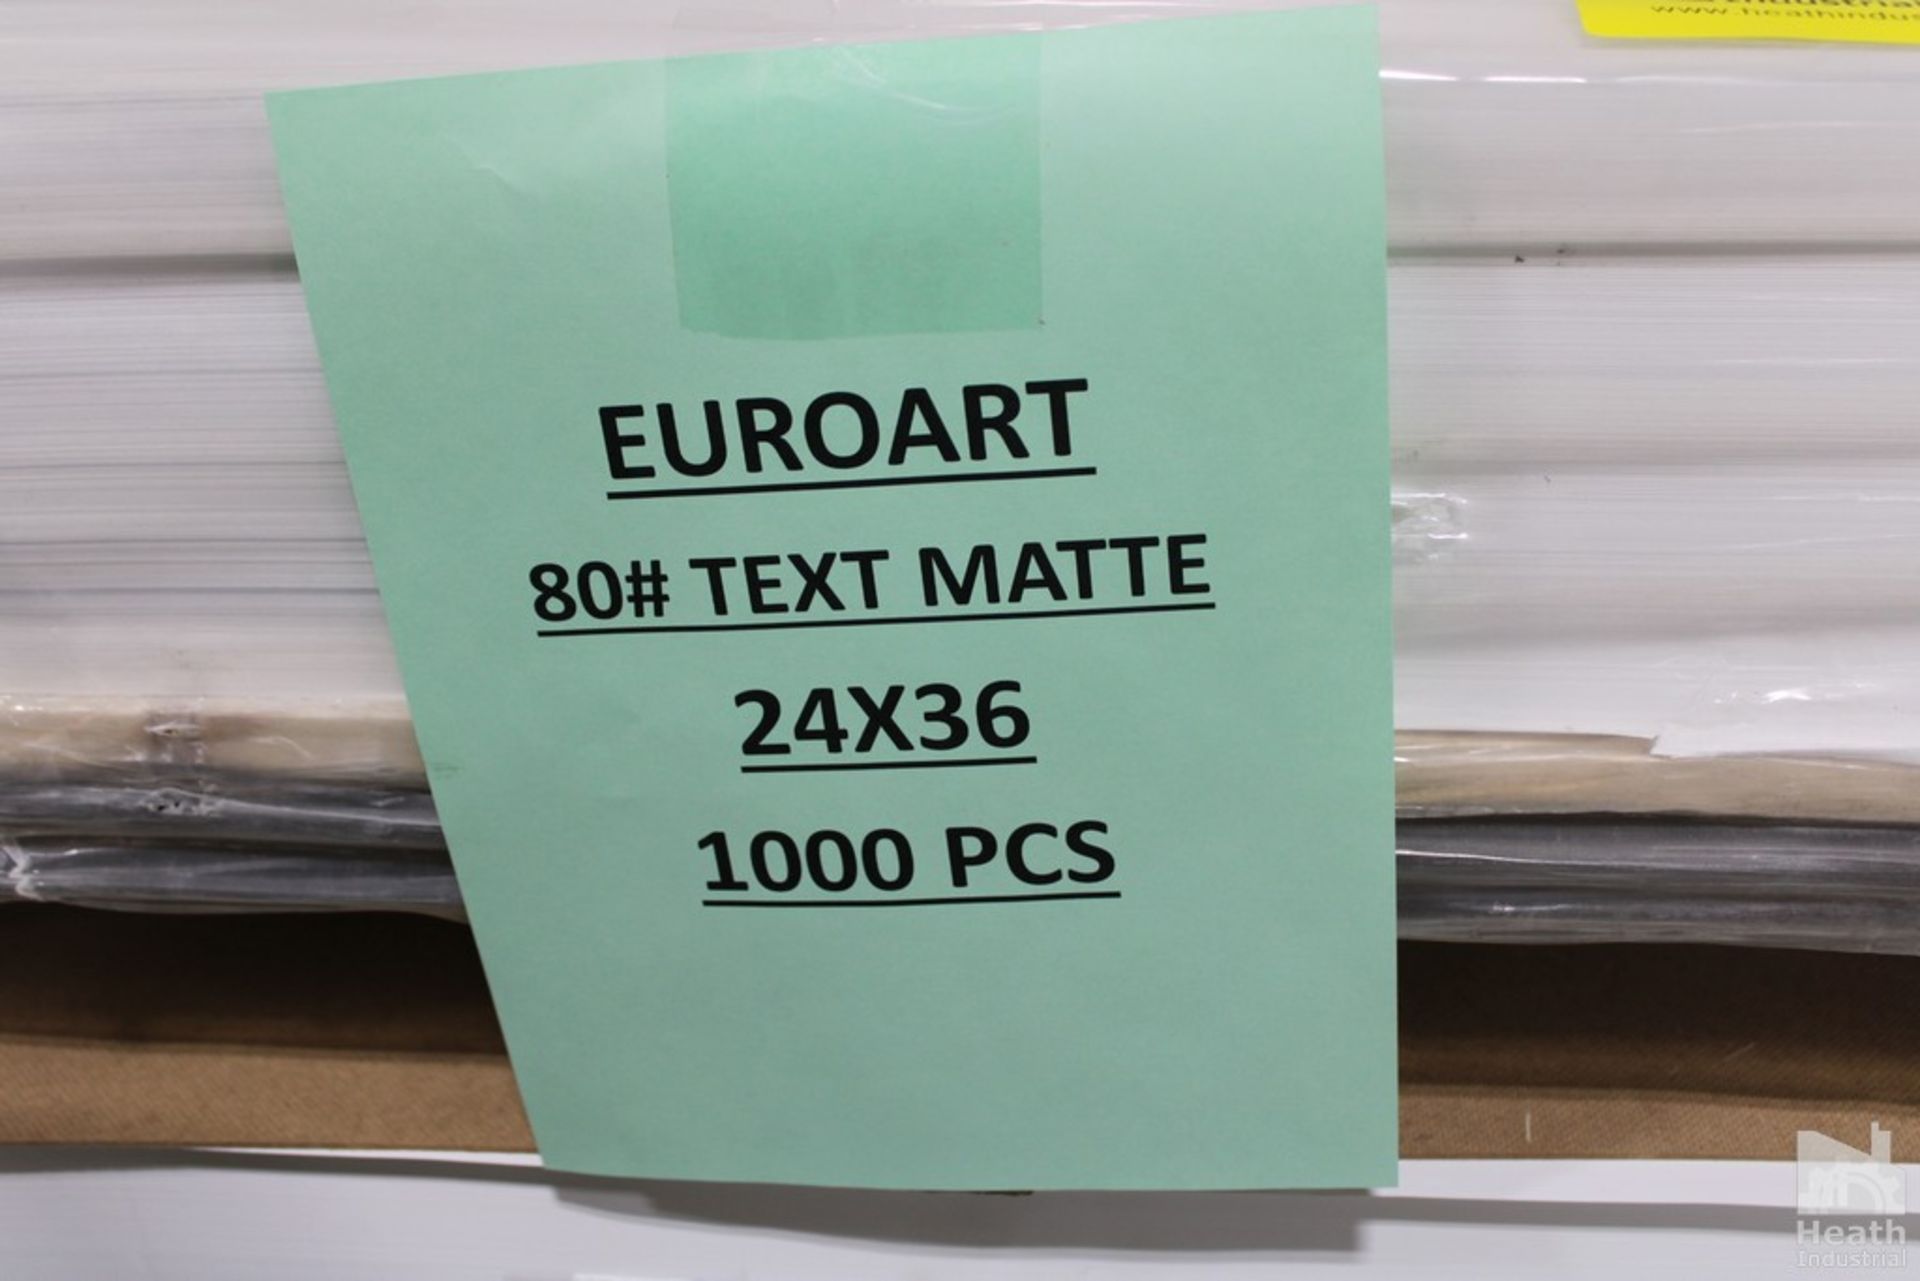 (2) SKIDS ASSORTED EUROART PAPER APPROXIMATELY 2,500 SHEETS - Image 2 of 2